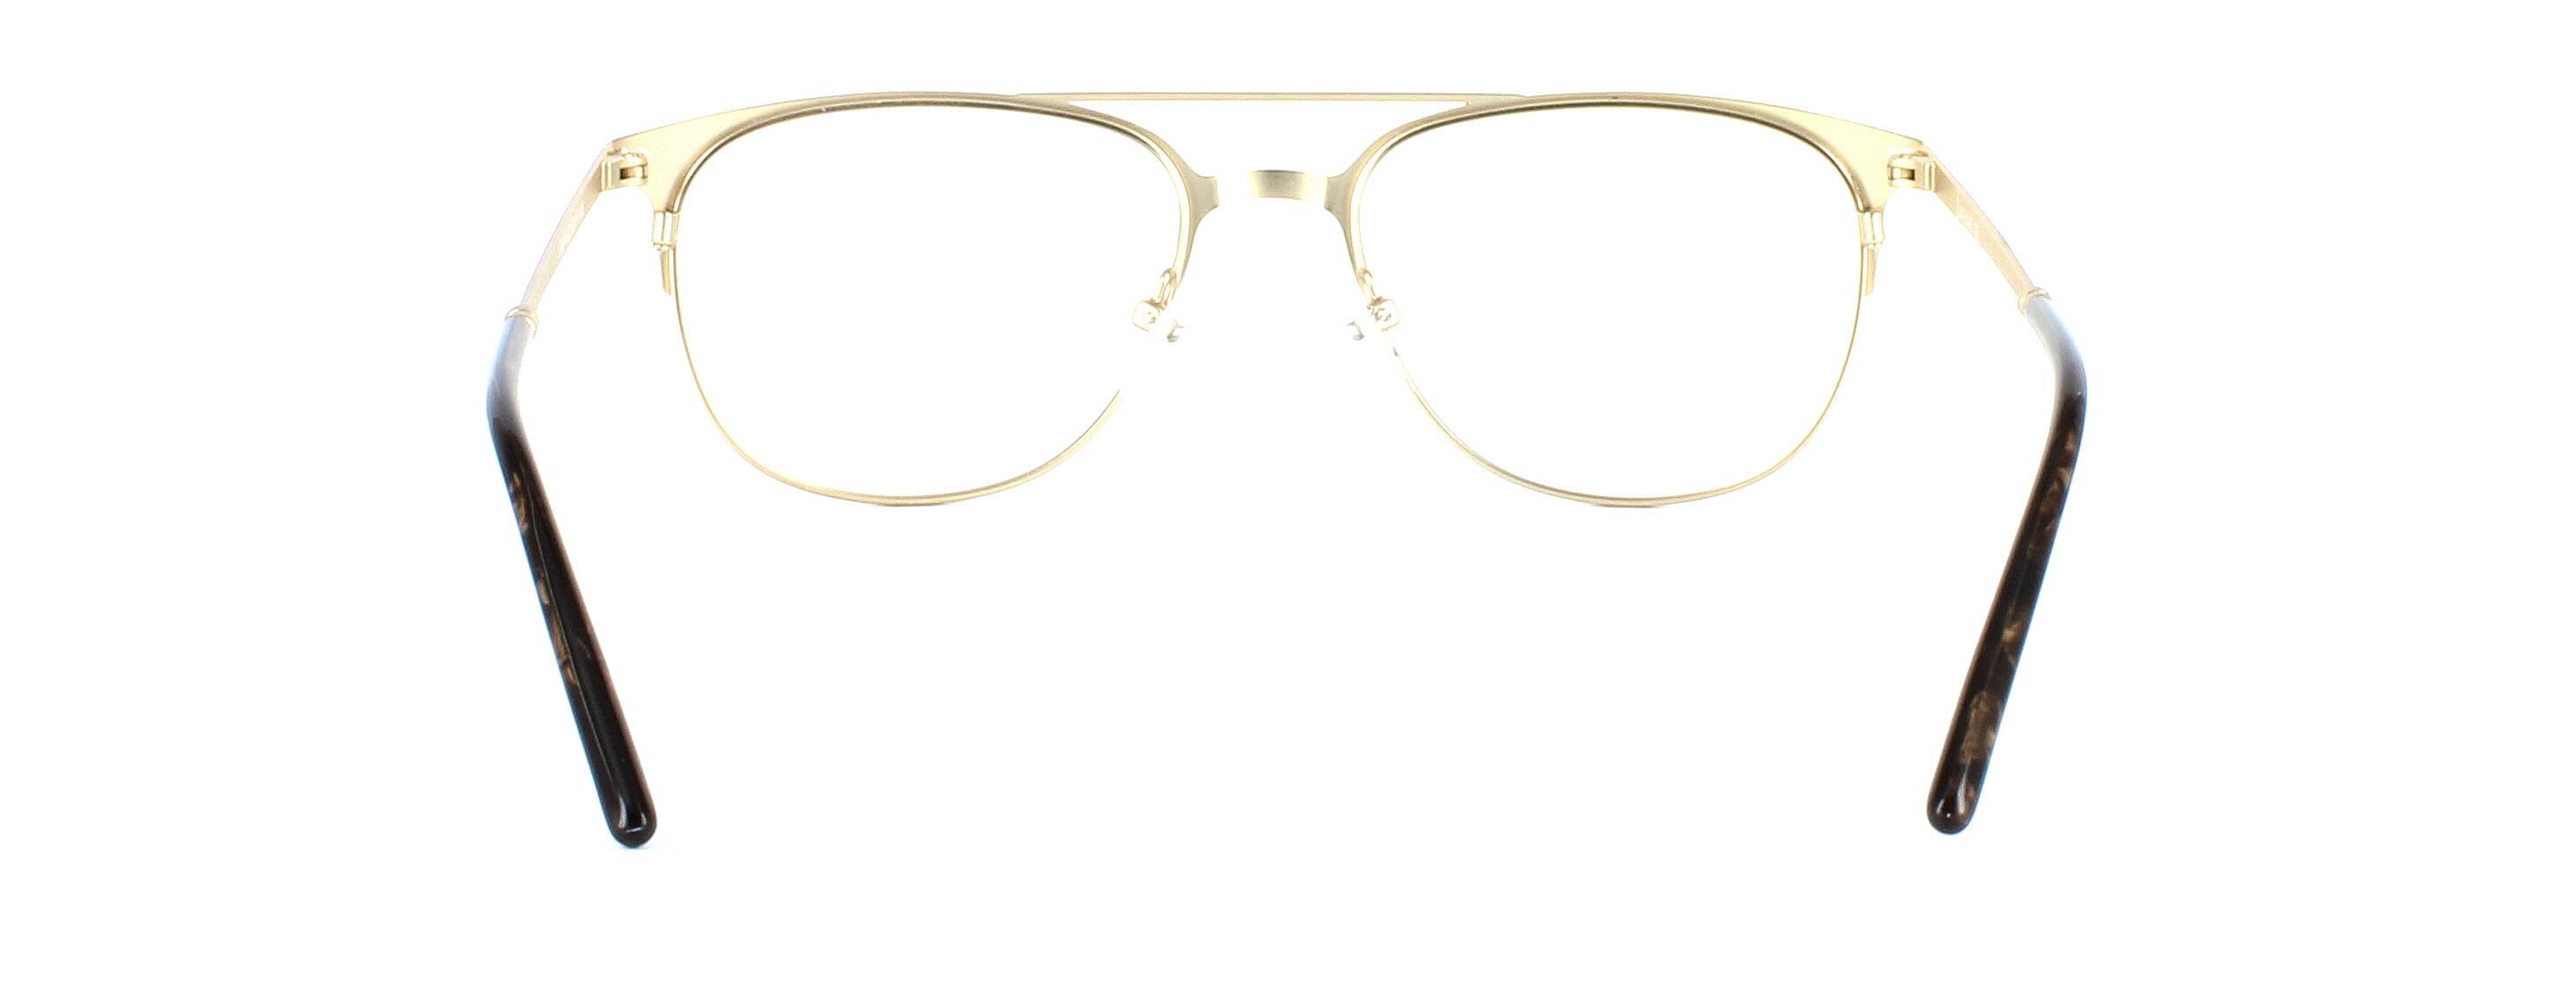 Nyton - Ladies full rim metal glasses in brown and gold - image view 3